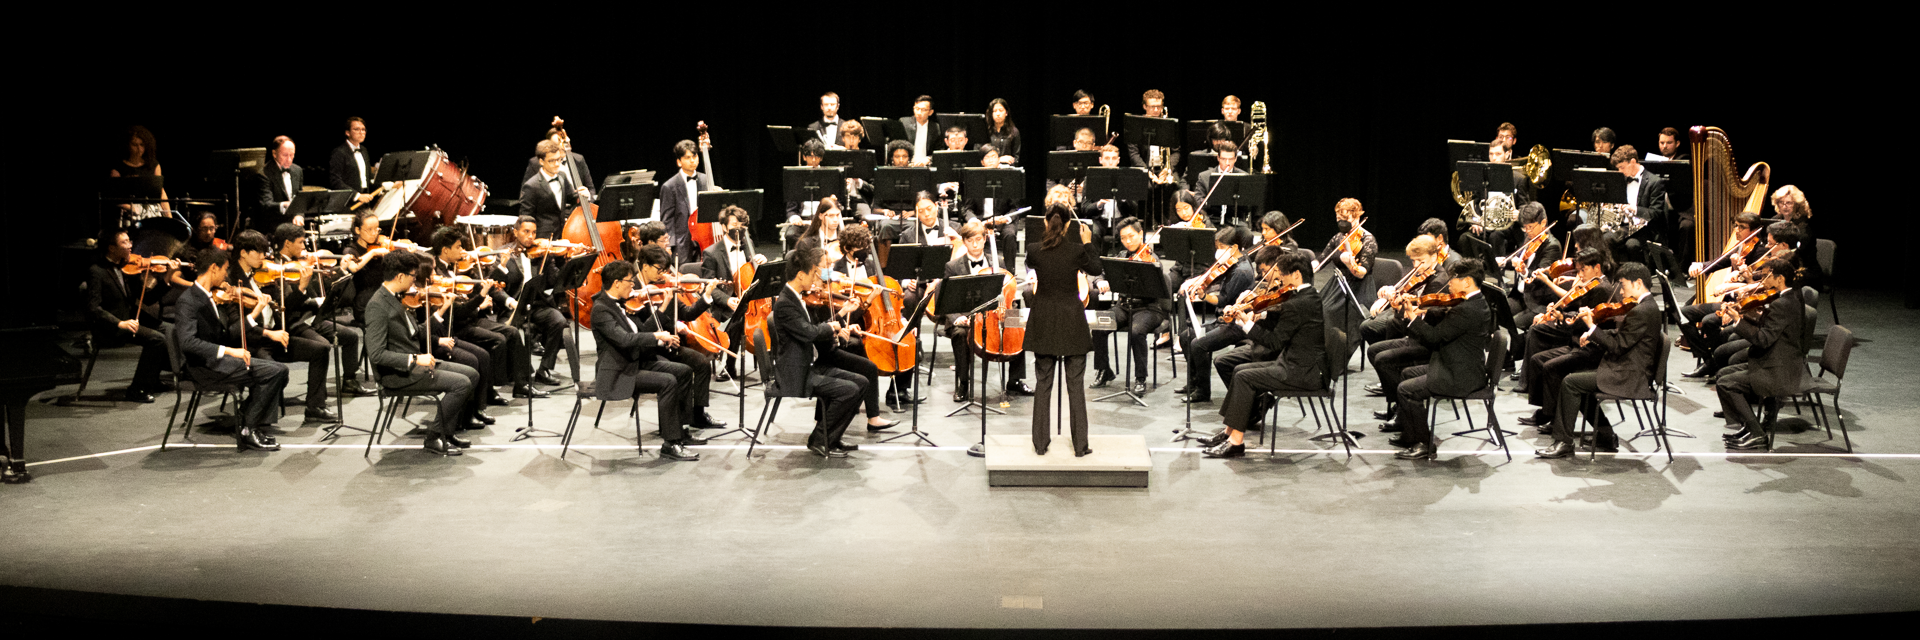 The Georgia Tech Symphony Orchestra on stage at the Ferst Center for the Arts.